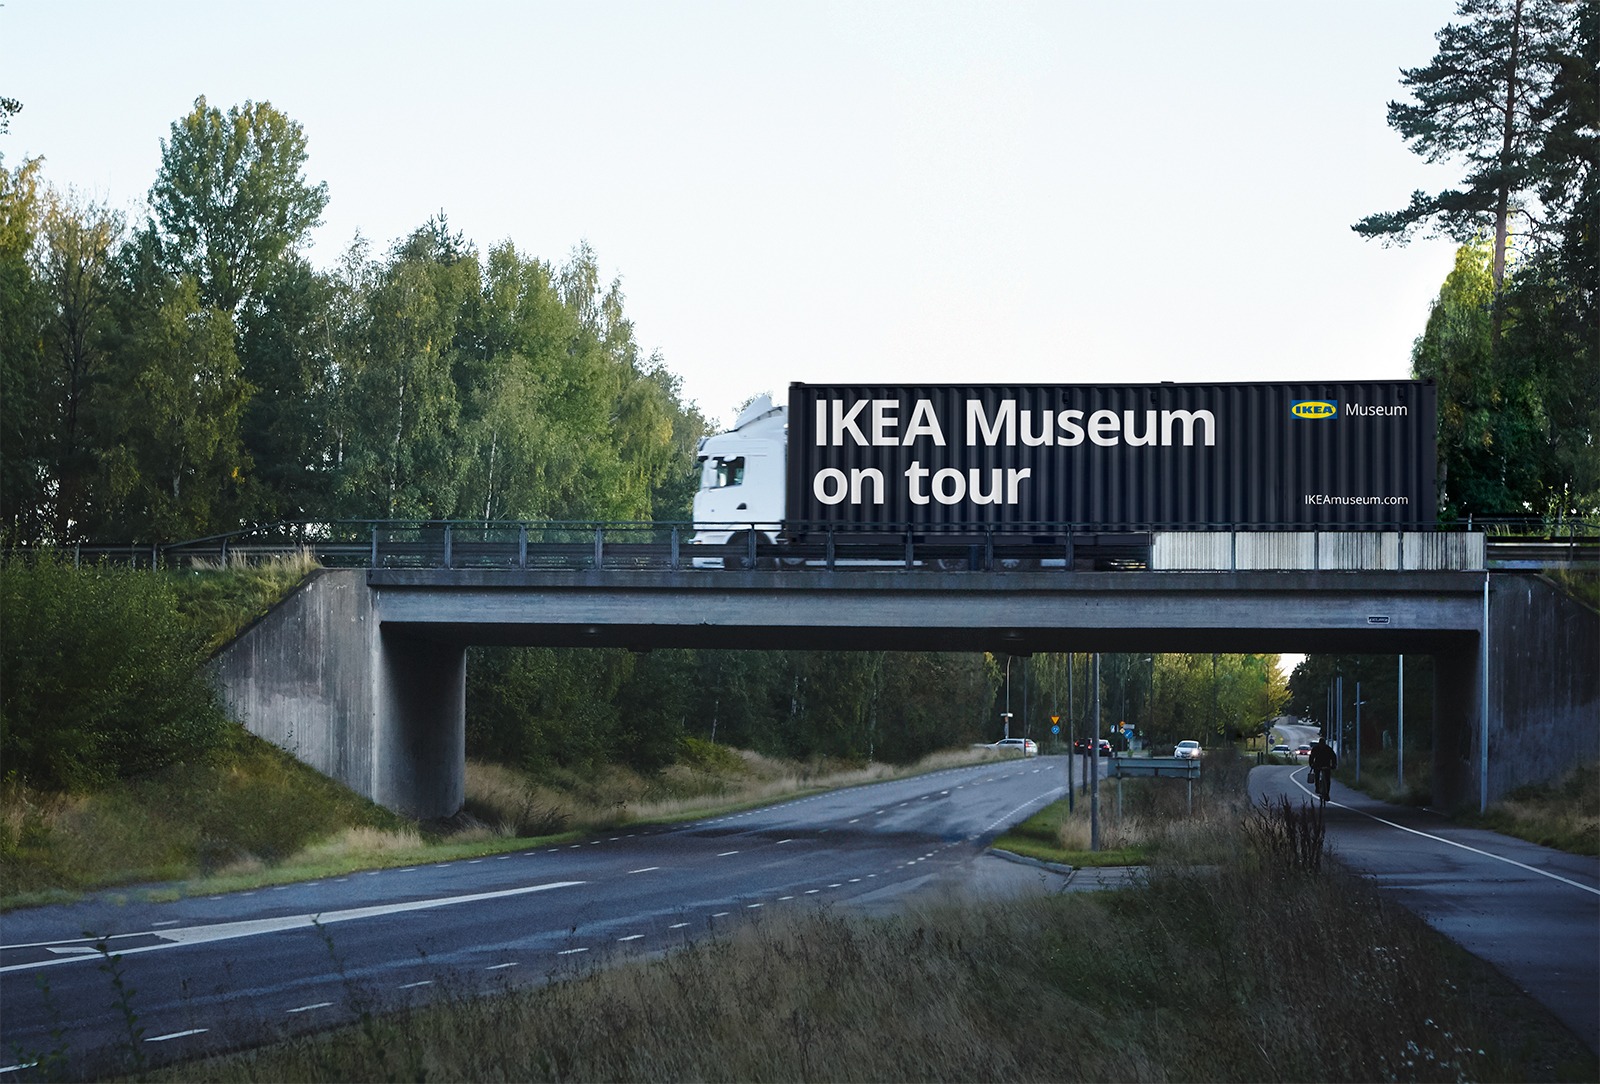 Trees, a road and a road bridge with a truck loaded with a container marked “IKEA Museum on tour” driving by.